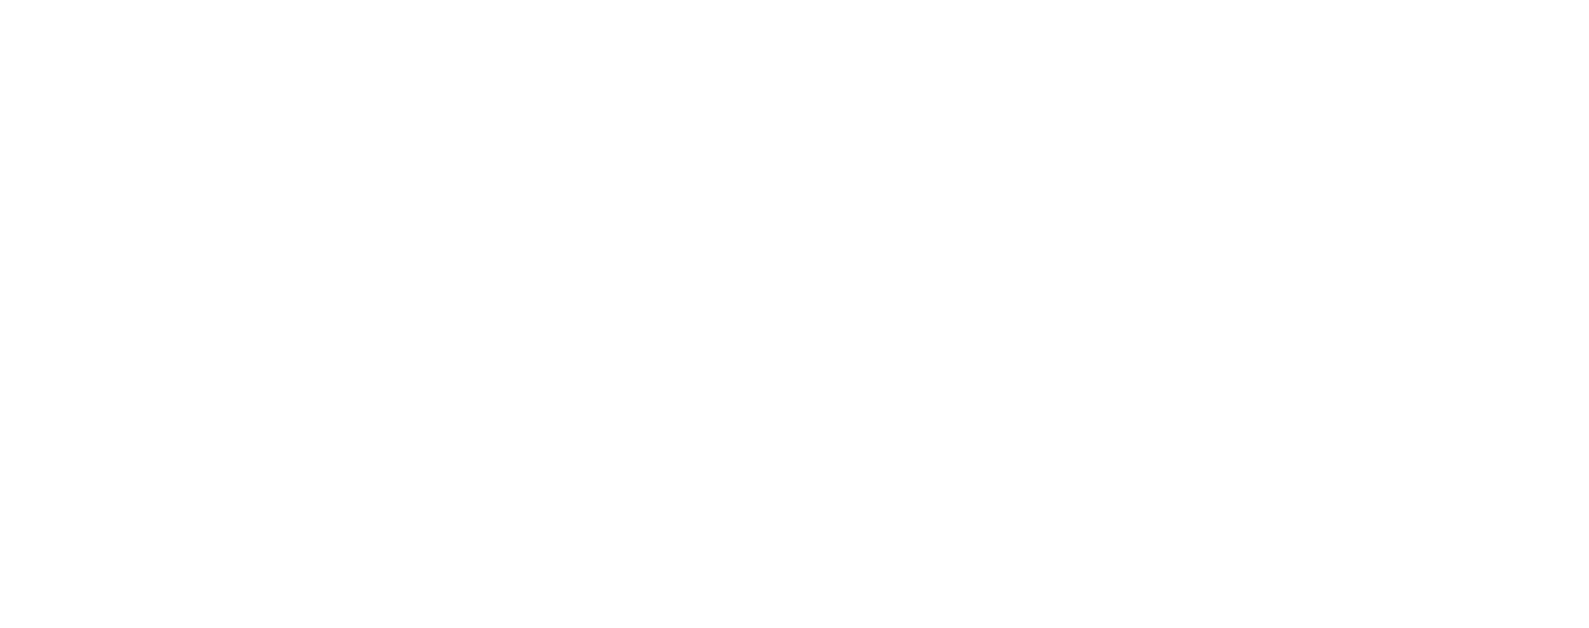 Ministry for Ethnic Communities